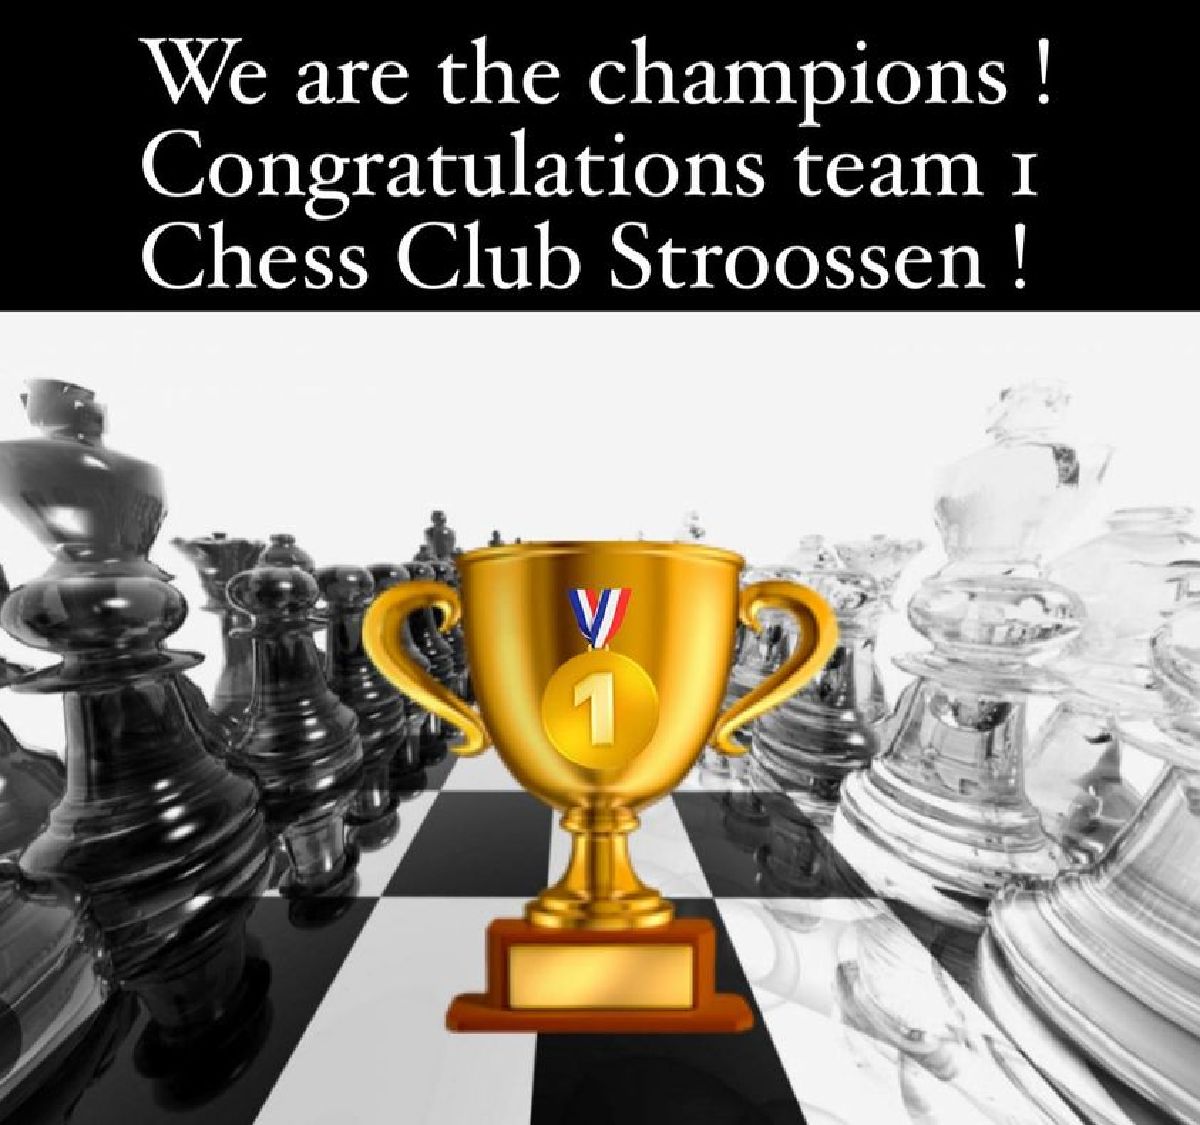 Our team Chess Club Stroossen is a winner of the 3d division of The Federation season 2022-2023